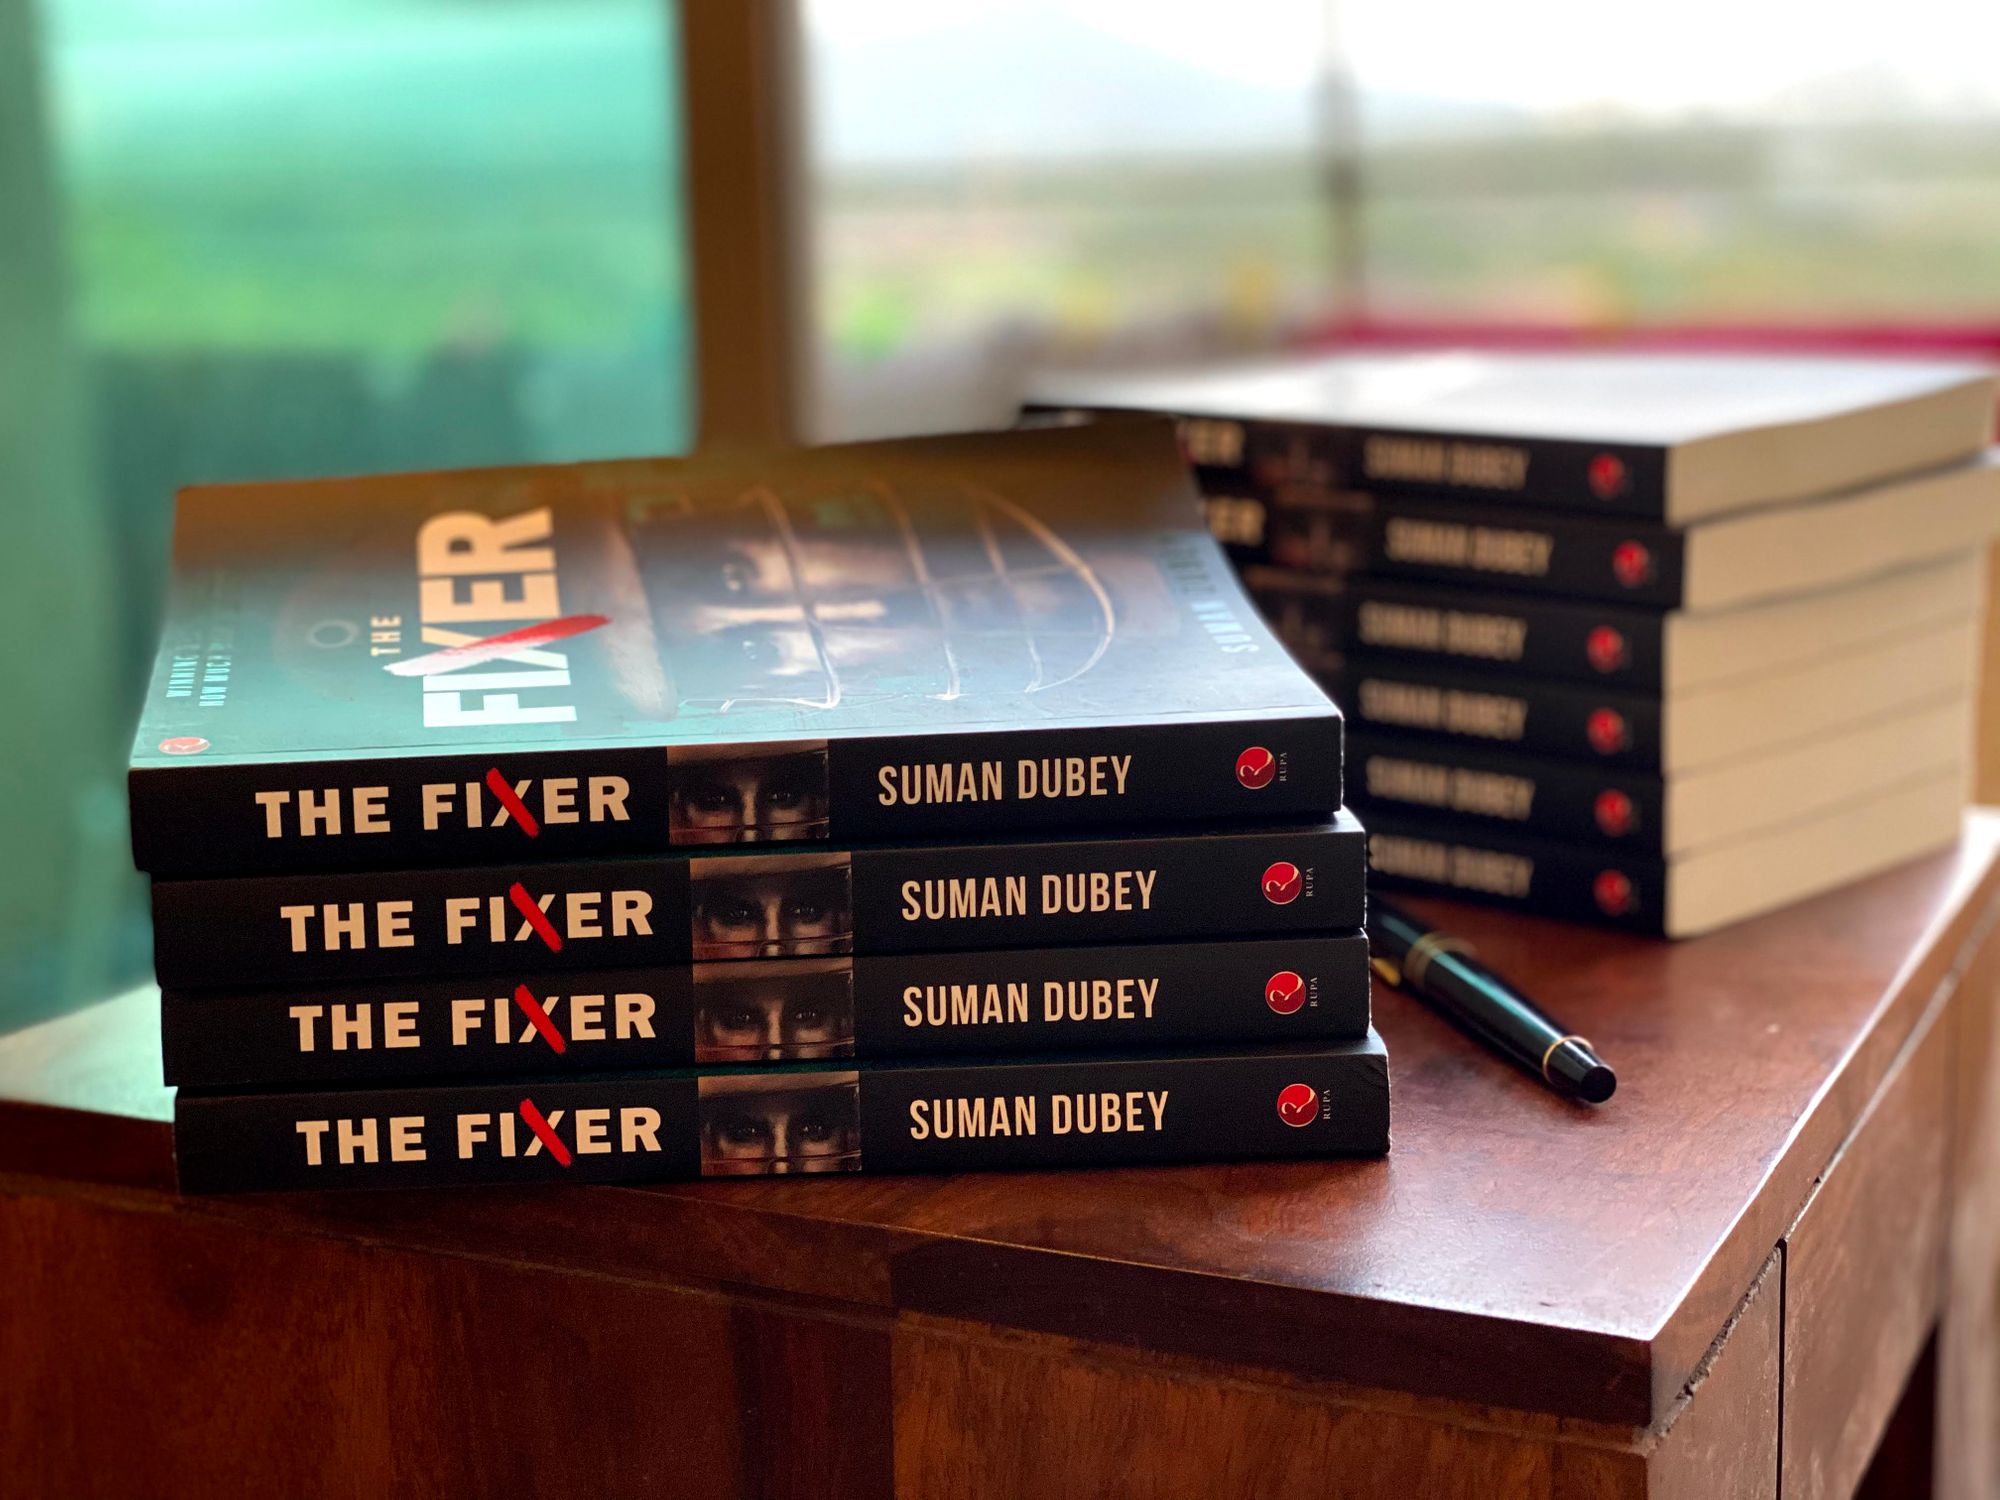 Image showing two stacks of Suman Dubey’s first book “The Fixer”.  